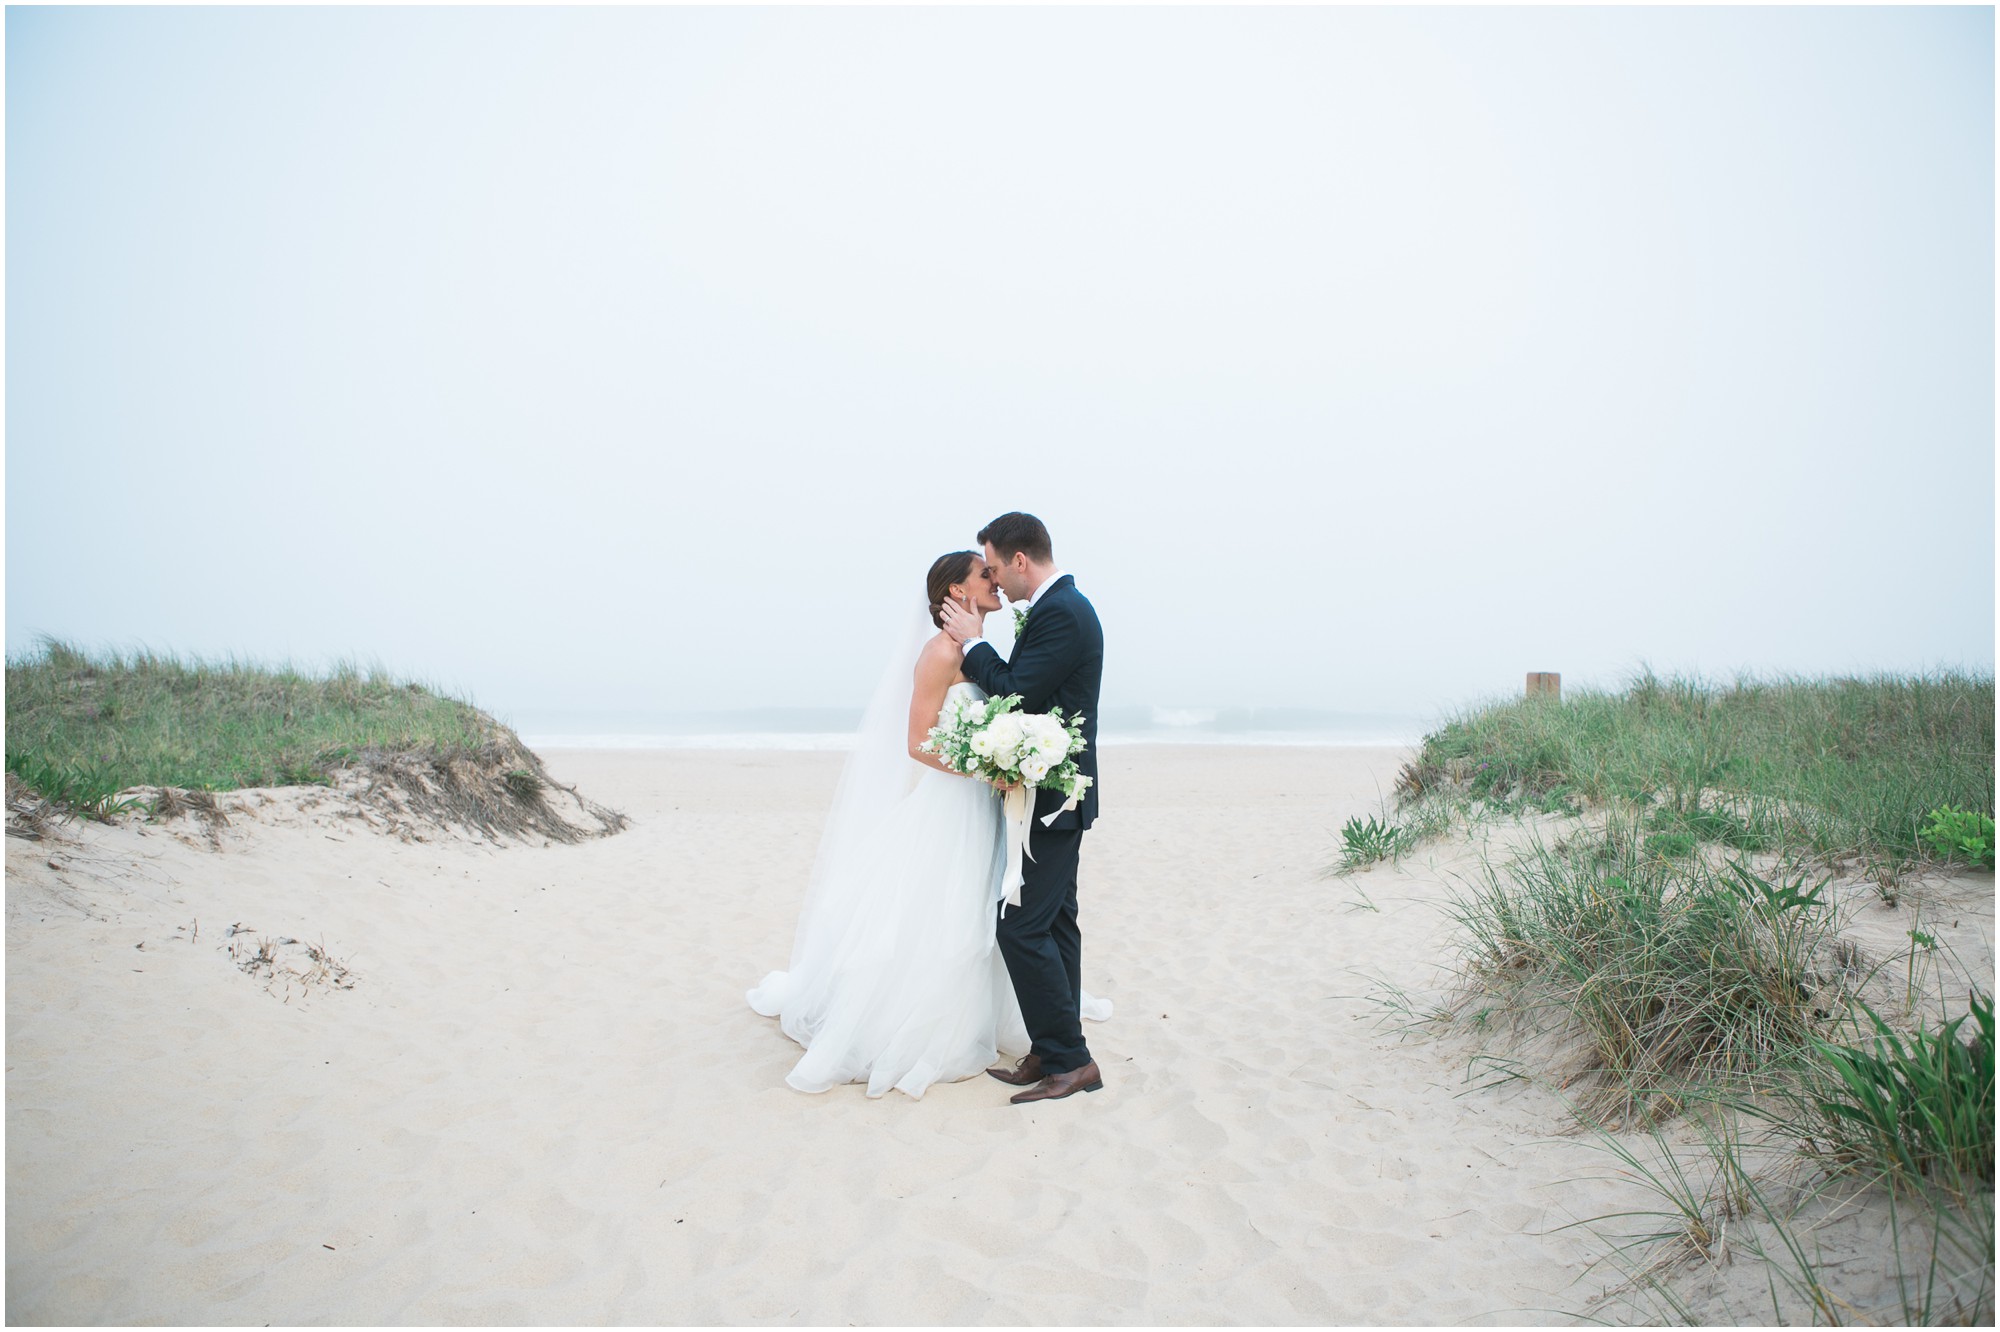 A bride and groom on the beach in the hamptons